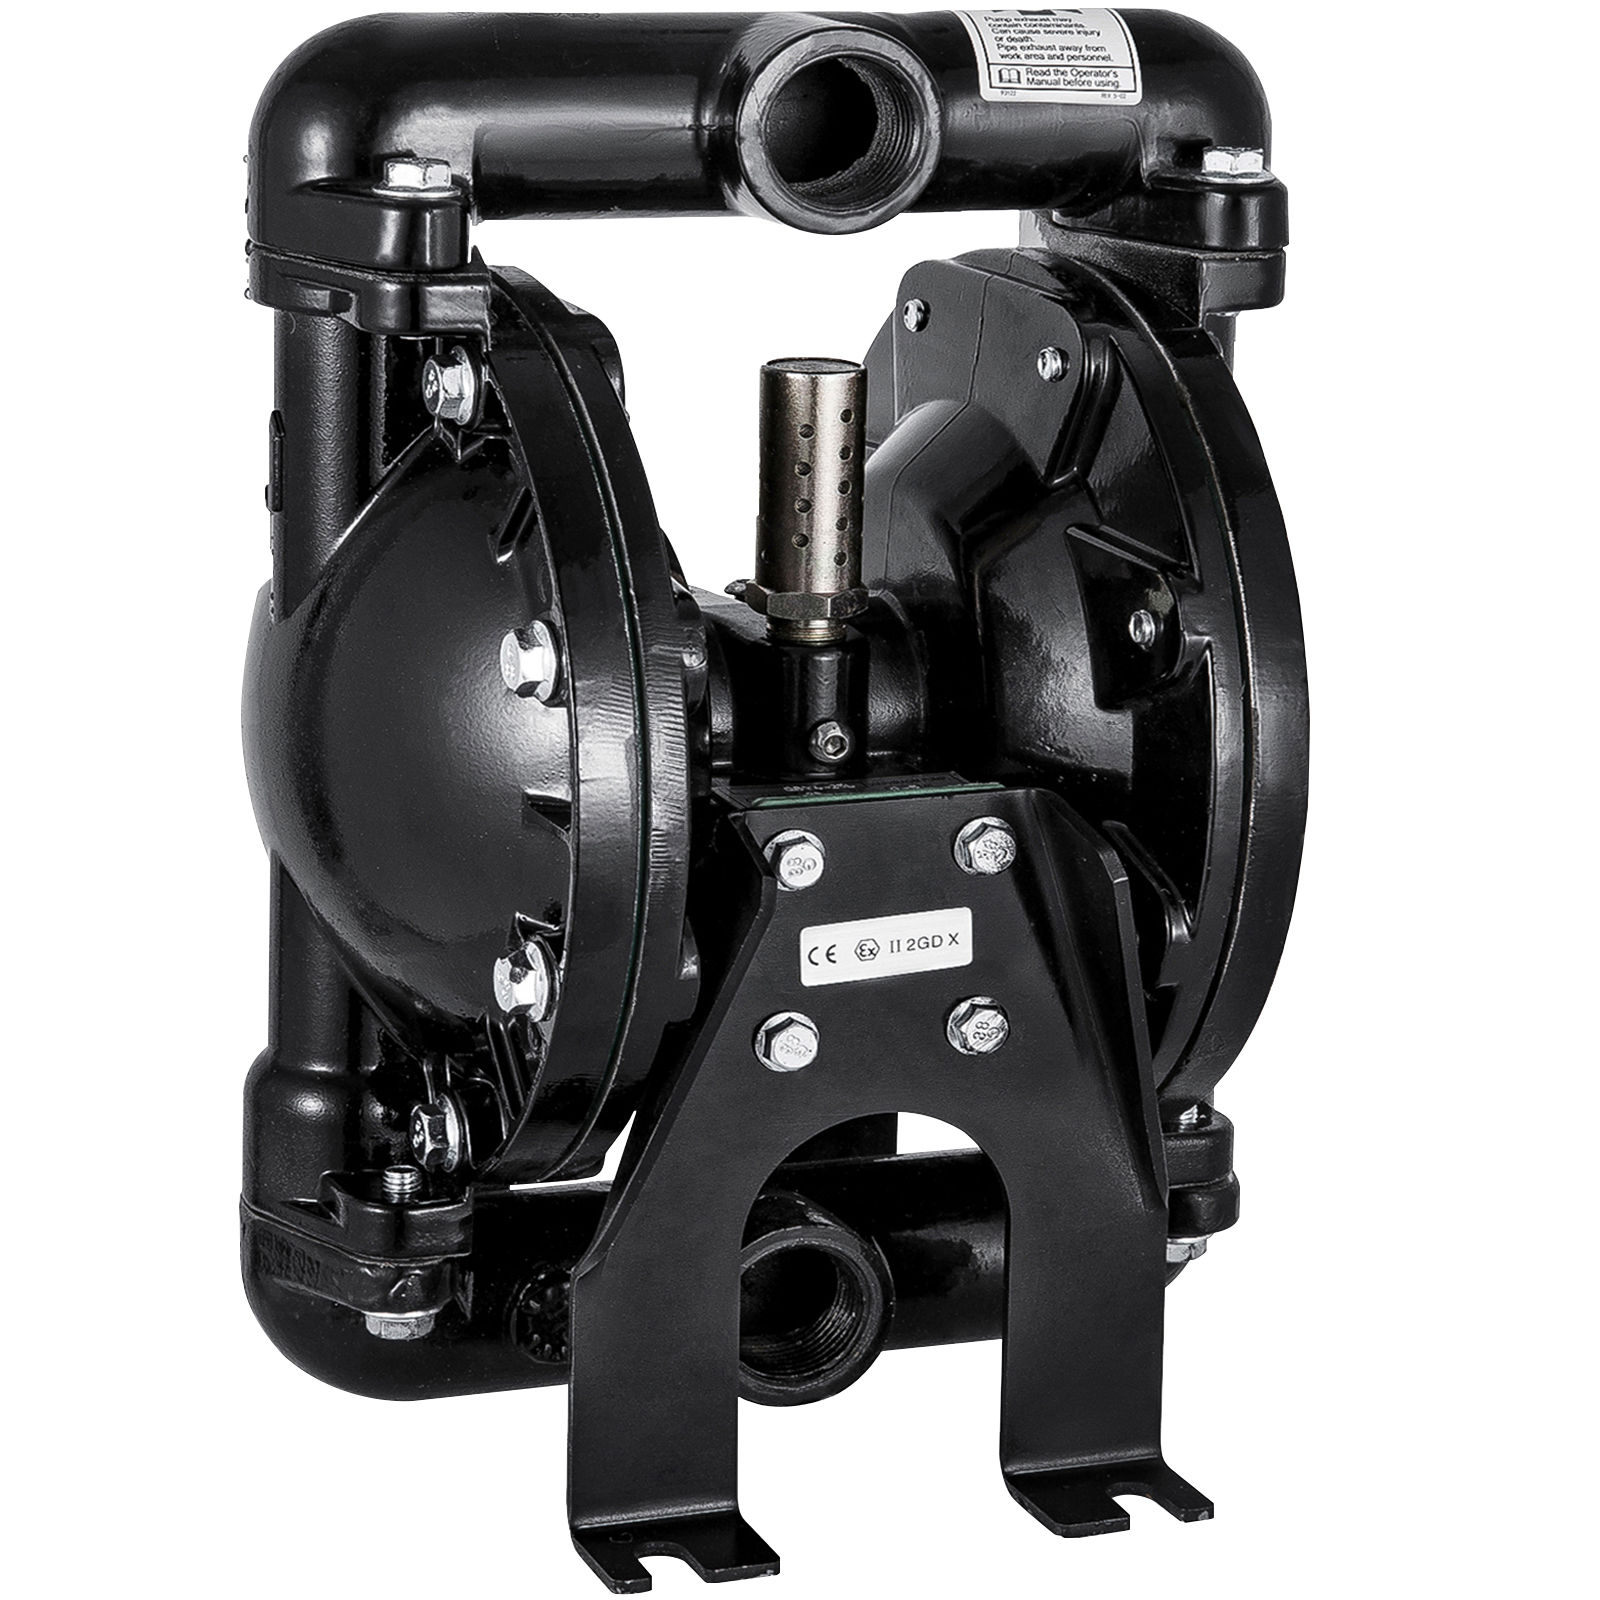 Air-operated Double Diaphragm Pump 1" Inlet Outlet Petroleum Fluids 35gpm 120psi от Vevor Many GEOs